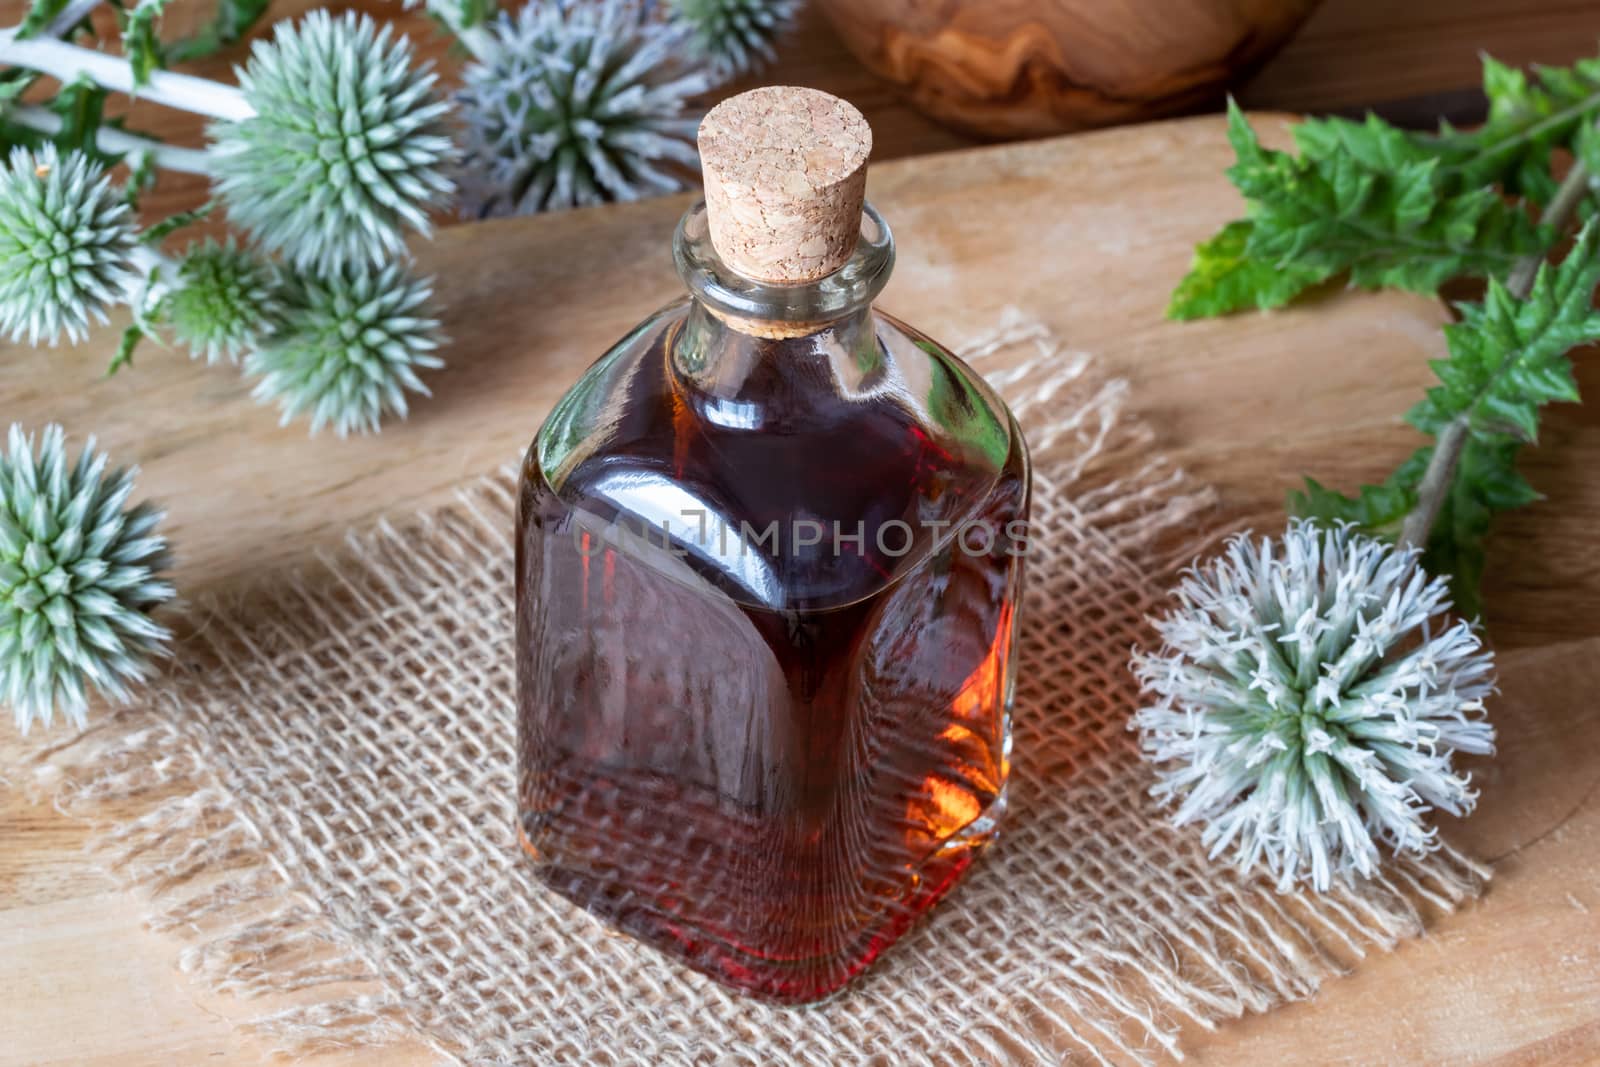 A bottle of great globe-thistle tincture with fresh blooming Echinops sphaerocephalus plant